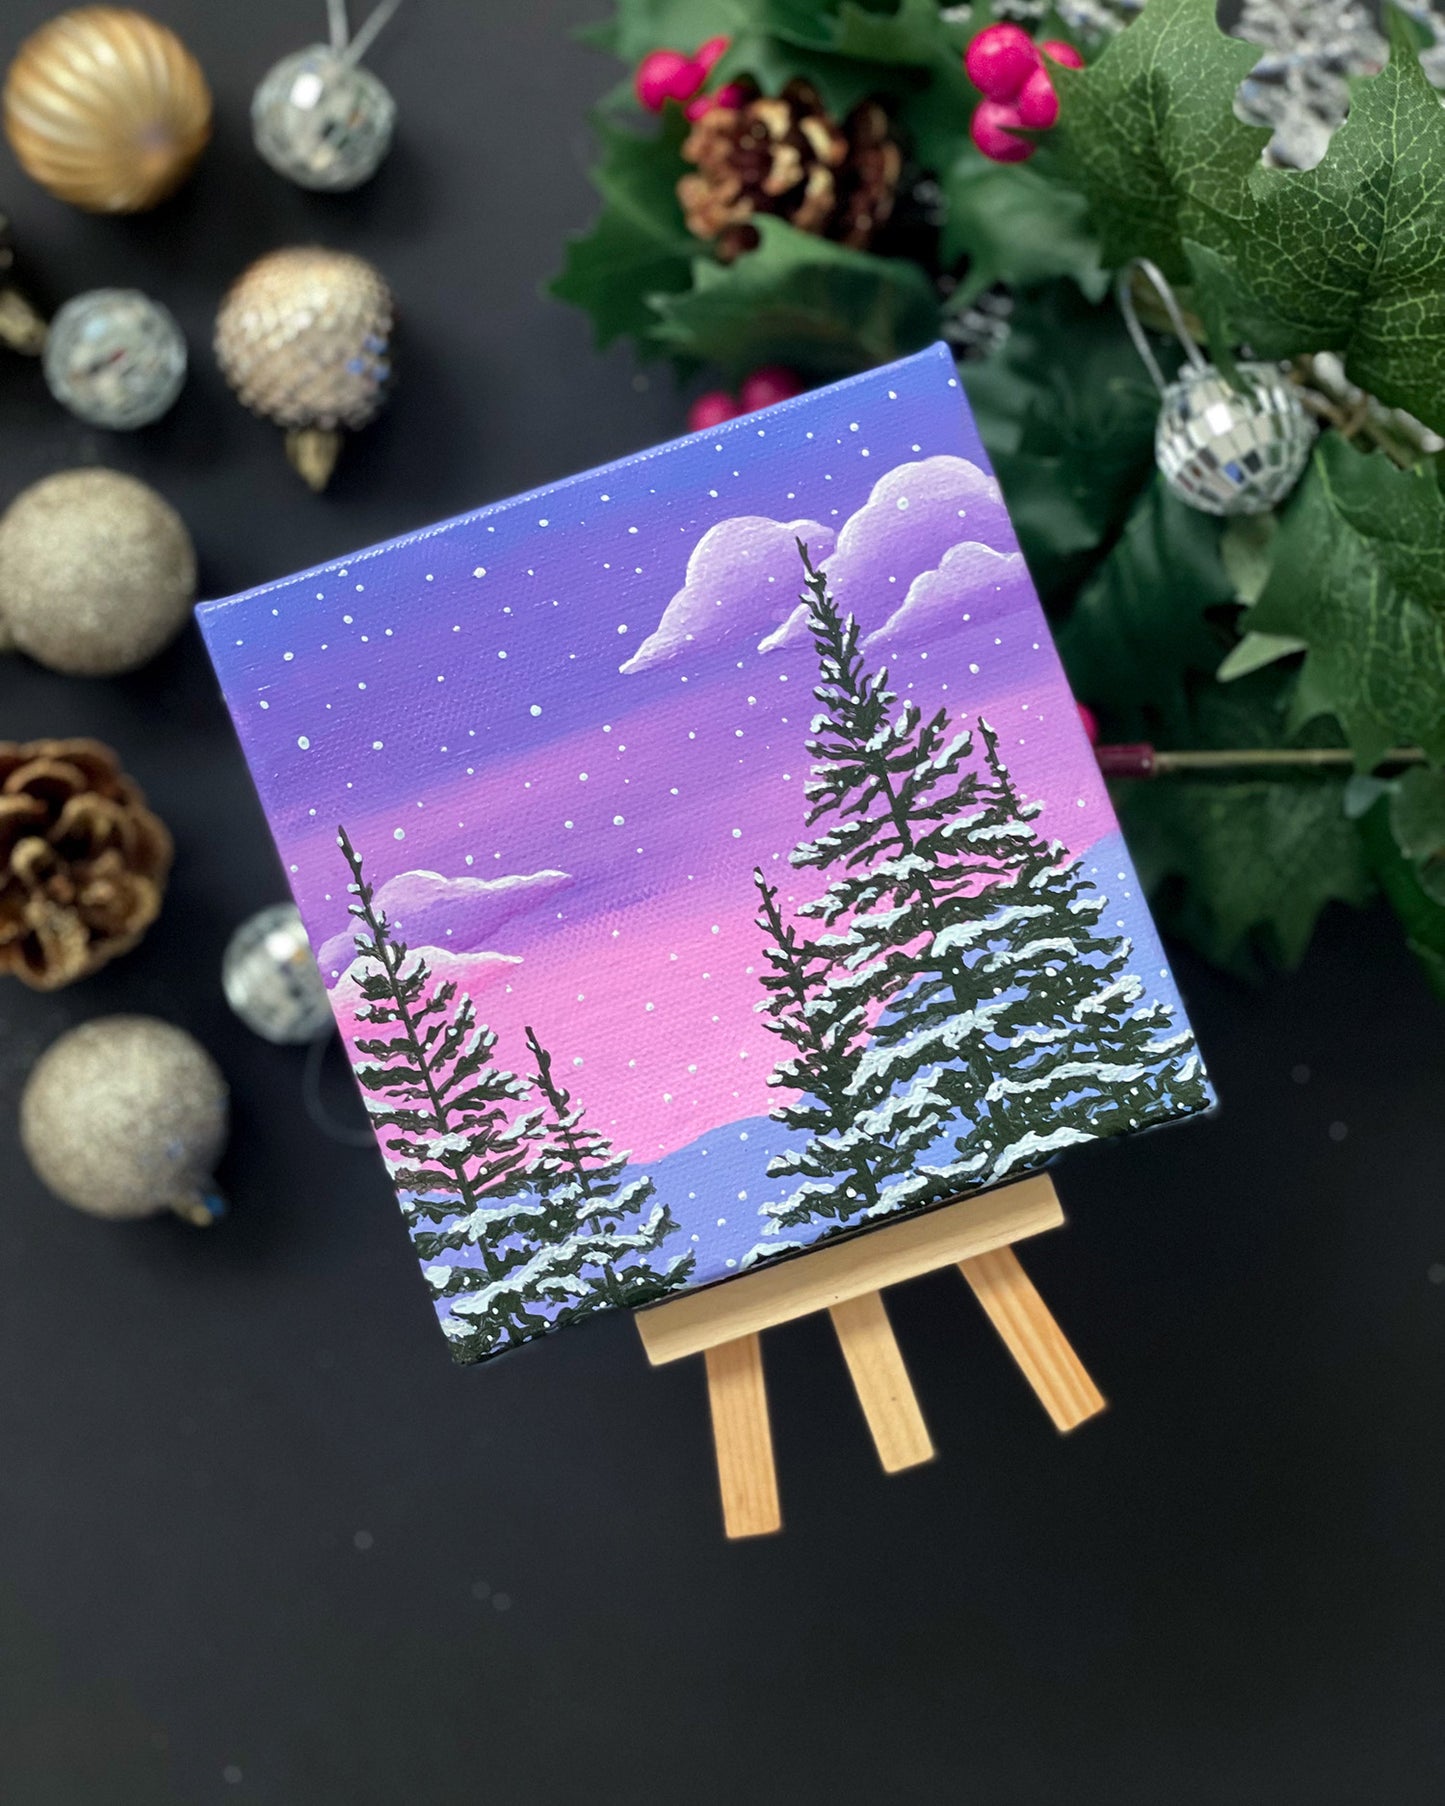 "Twilight Snowfall" Mini-Painting with Easel